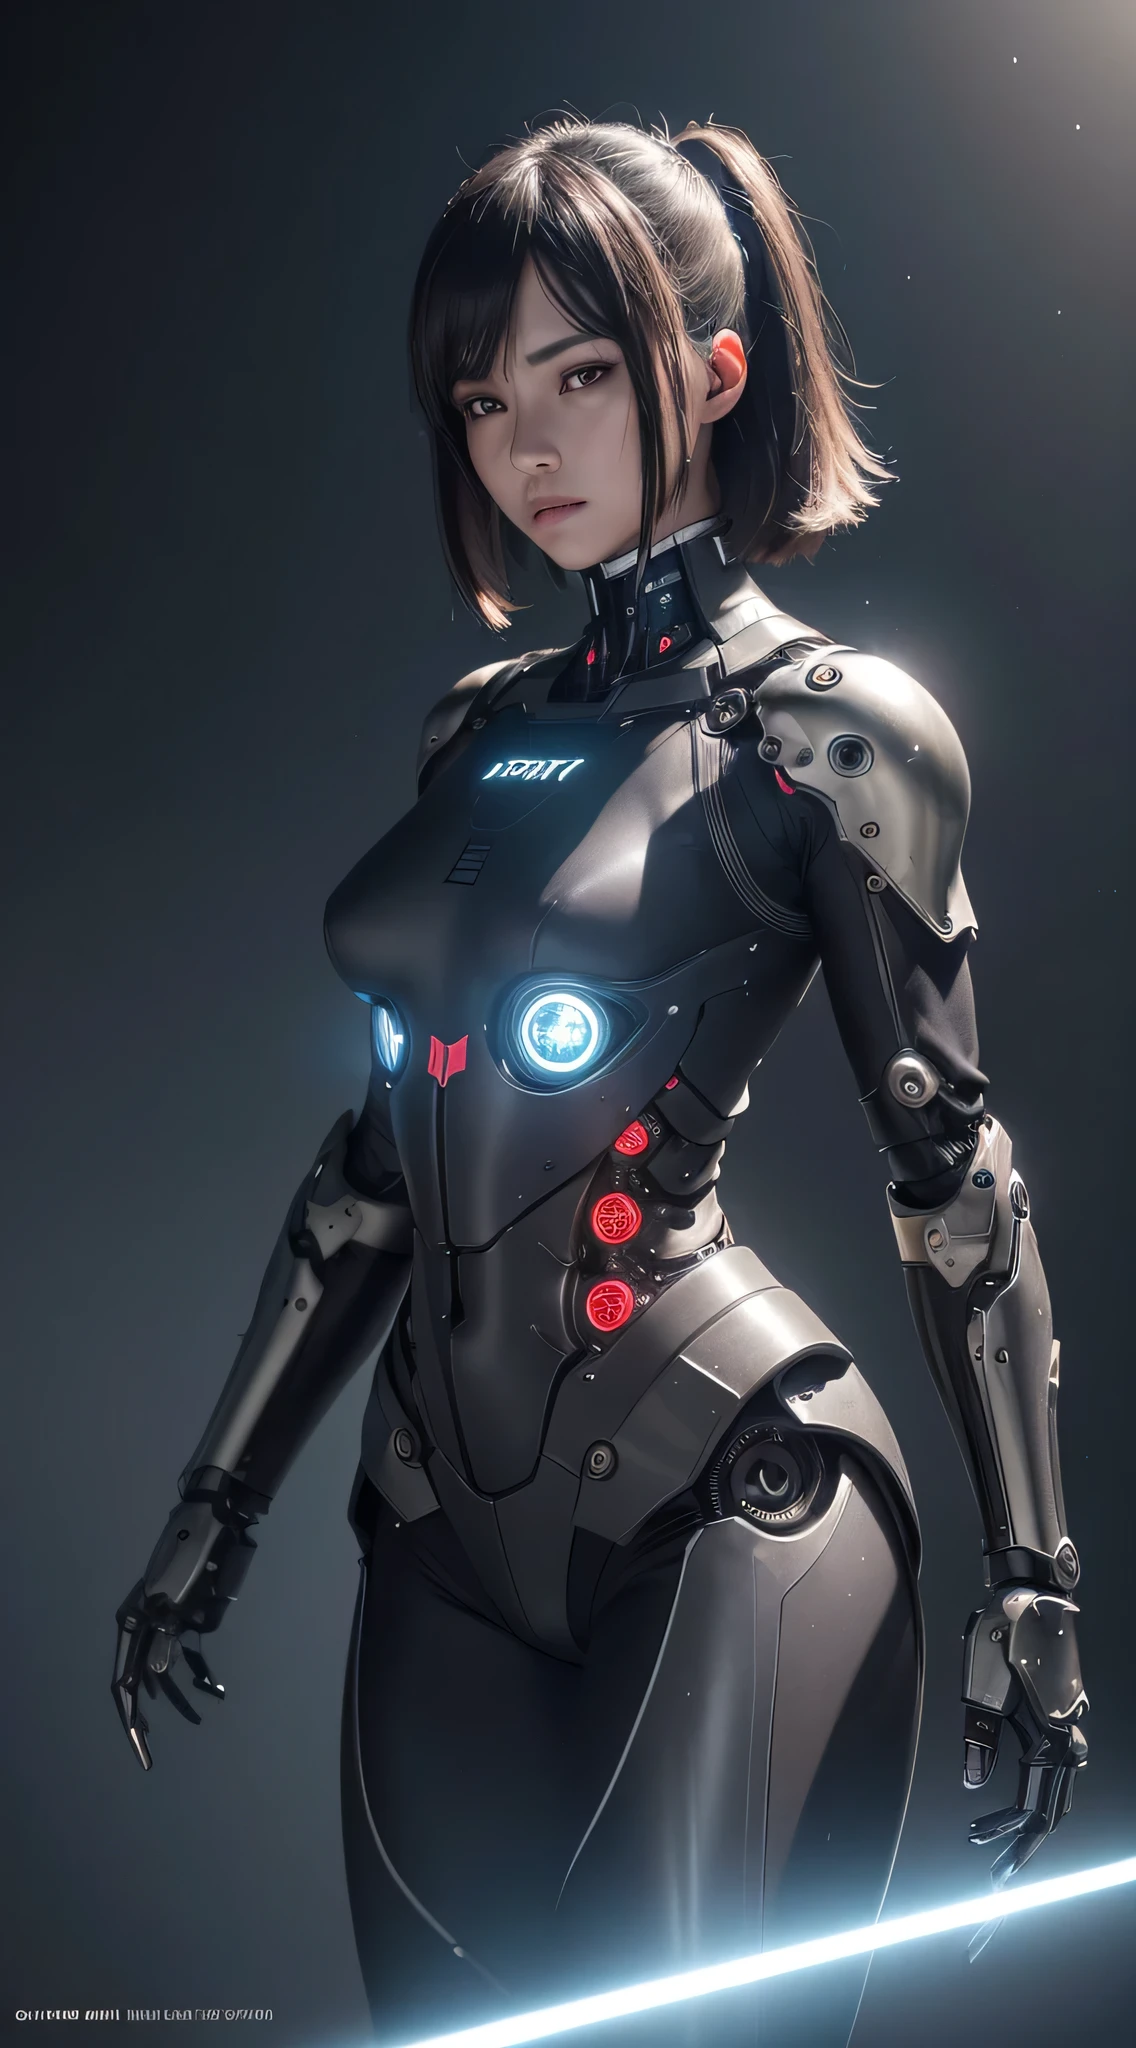 (1.5), (1 Mechanical Girl: 1.5), Full body, Solo, Slender waist, thick thighs, (Mechanical joints: 1.2), (Mechanical limbs: 1.1), (blood vessels connected to tubes), (Mechanical vertebrae attached to the back), (Mechanical neck attached to the neck), armored light, mechanical head mirror, (Shining arms: 1.5), (laser eyes: 1.5), deadpan,, Color, nffsw, Ray tracing, NVIDIA RTX, Super Resolution, Unreal 5, Subsurface scattering, PBR Textures, post processed, Anisotropy Filtering, depth of fields, Maximum sharpness and sharpness, thirds rule, 16k low particle: 1.4), extremely details CG, Unity 8k Wallpapers, 。.。.3D, Cinematic Lighting, lens halo, Reflectors, Sharp Focus, Cyberpunk Art, Realistic, Highly Detailed CG Illustration, Extremely delicate and beautiful, Cinematic Light, (Realistic:1.5), (Dark background: 1.5), Dynamic Angle, masutepiece, Best Quality, Hyper-detailing, Illustration, Detail light, Dramatic_Shadow,face shadow, extra details, best performance, (NSFW:0.5)